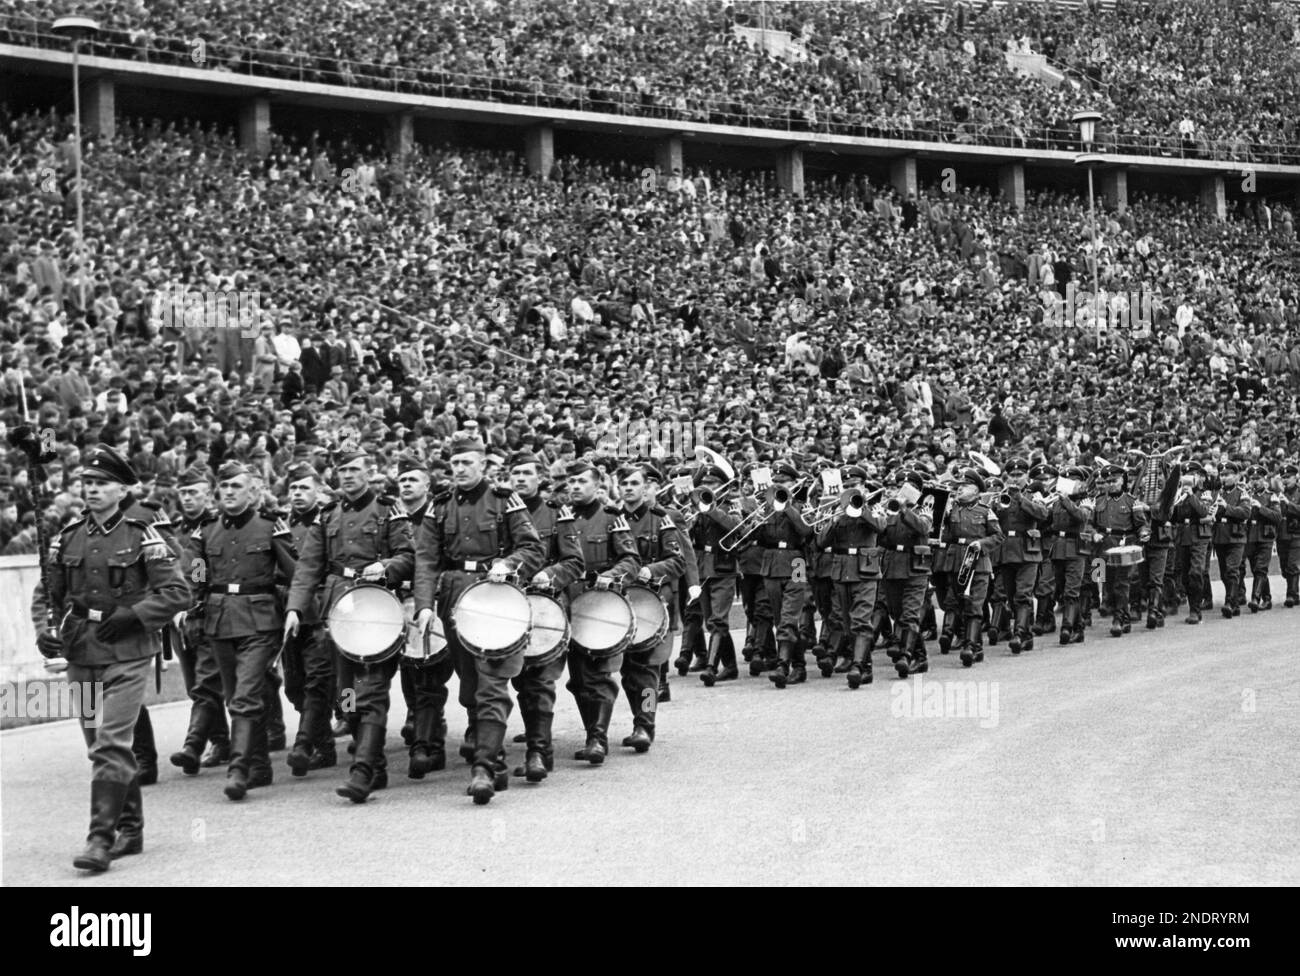 The march of the military band of the SS Totenkopf division before the start of a football match. Stock Photo